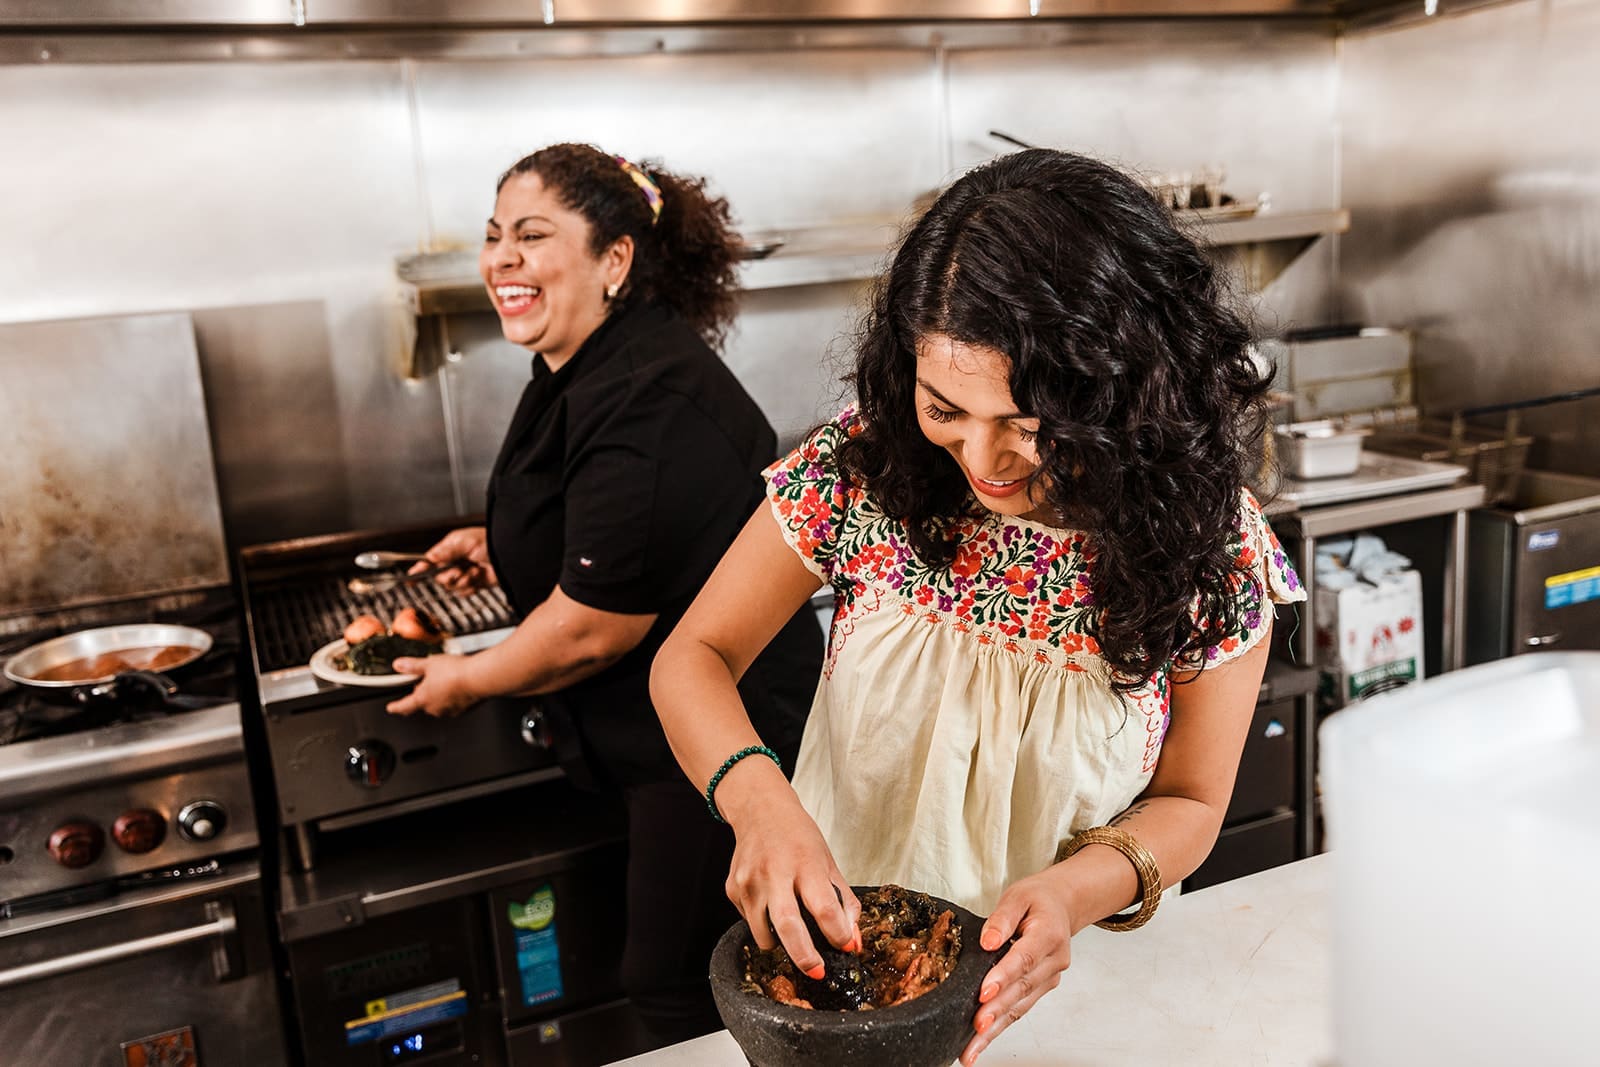 Reyna Maldonado and her mom Ofelia Barajas, co-owners of La Guerrera’s Kitchen, are amongst the 100 small diverse businesses in Oakland that received a $10,000 grant from the Comcast RISE Investment Fund. (Photo by: Carolyn Fong, courtesy of La Guerrera’s Kitchen.)